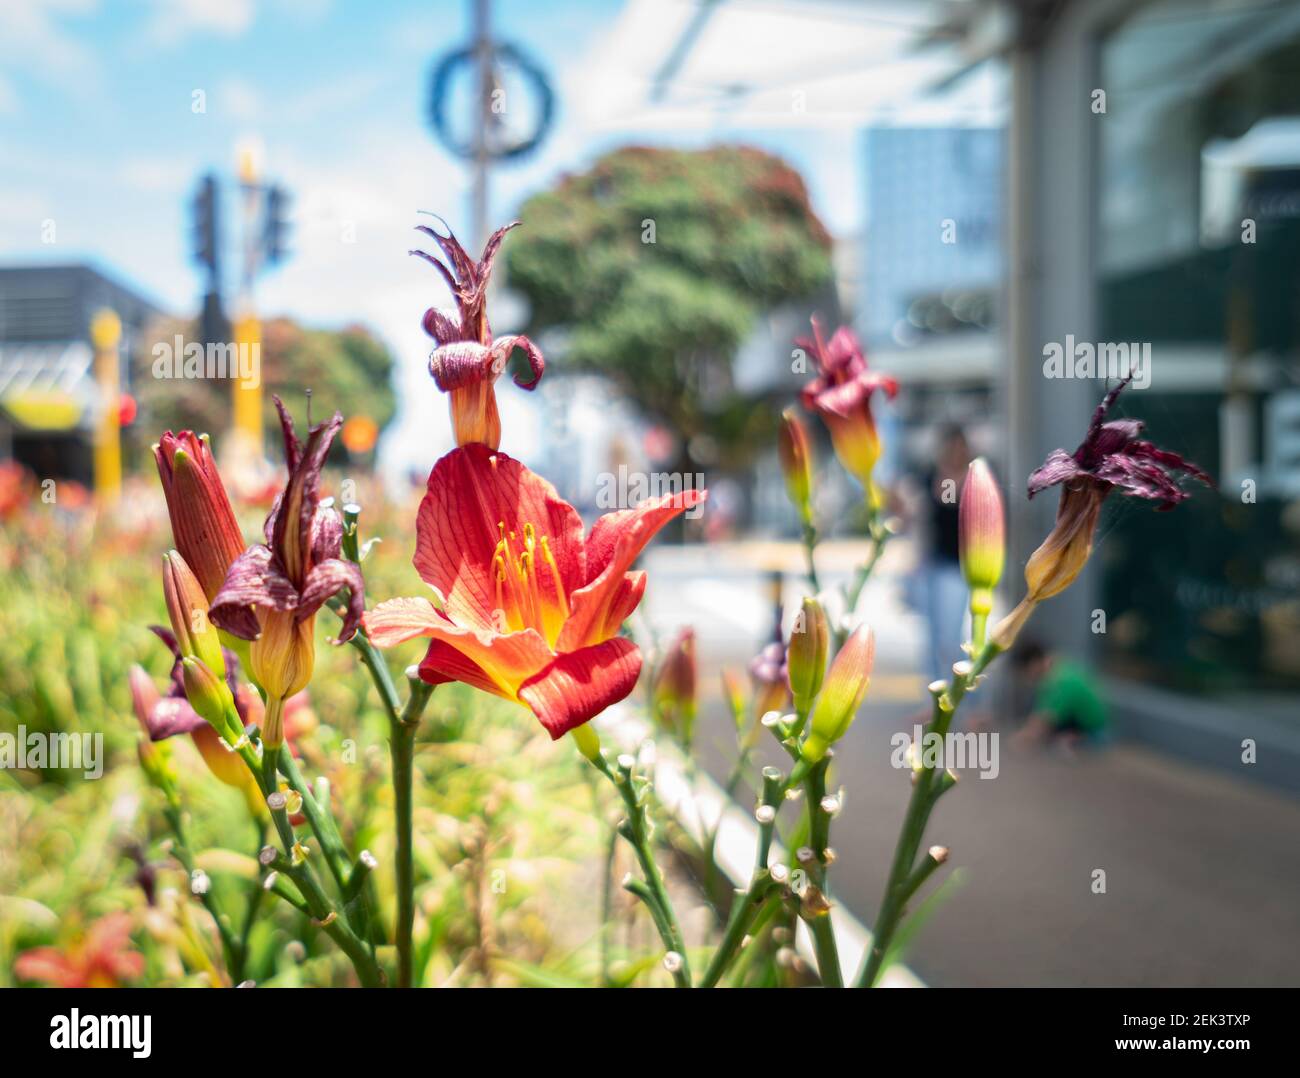 Sunny summer day at Takapuna, Auckland. Flowers blooming along the pedestrian path and out of focus Pohutukawa trees with red flowers. Stock Photo